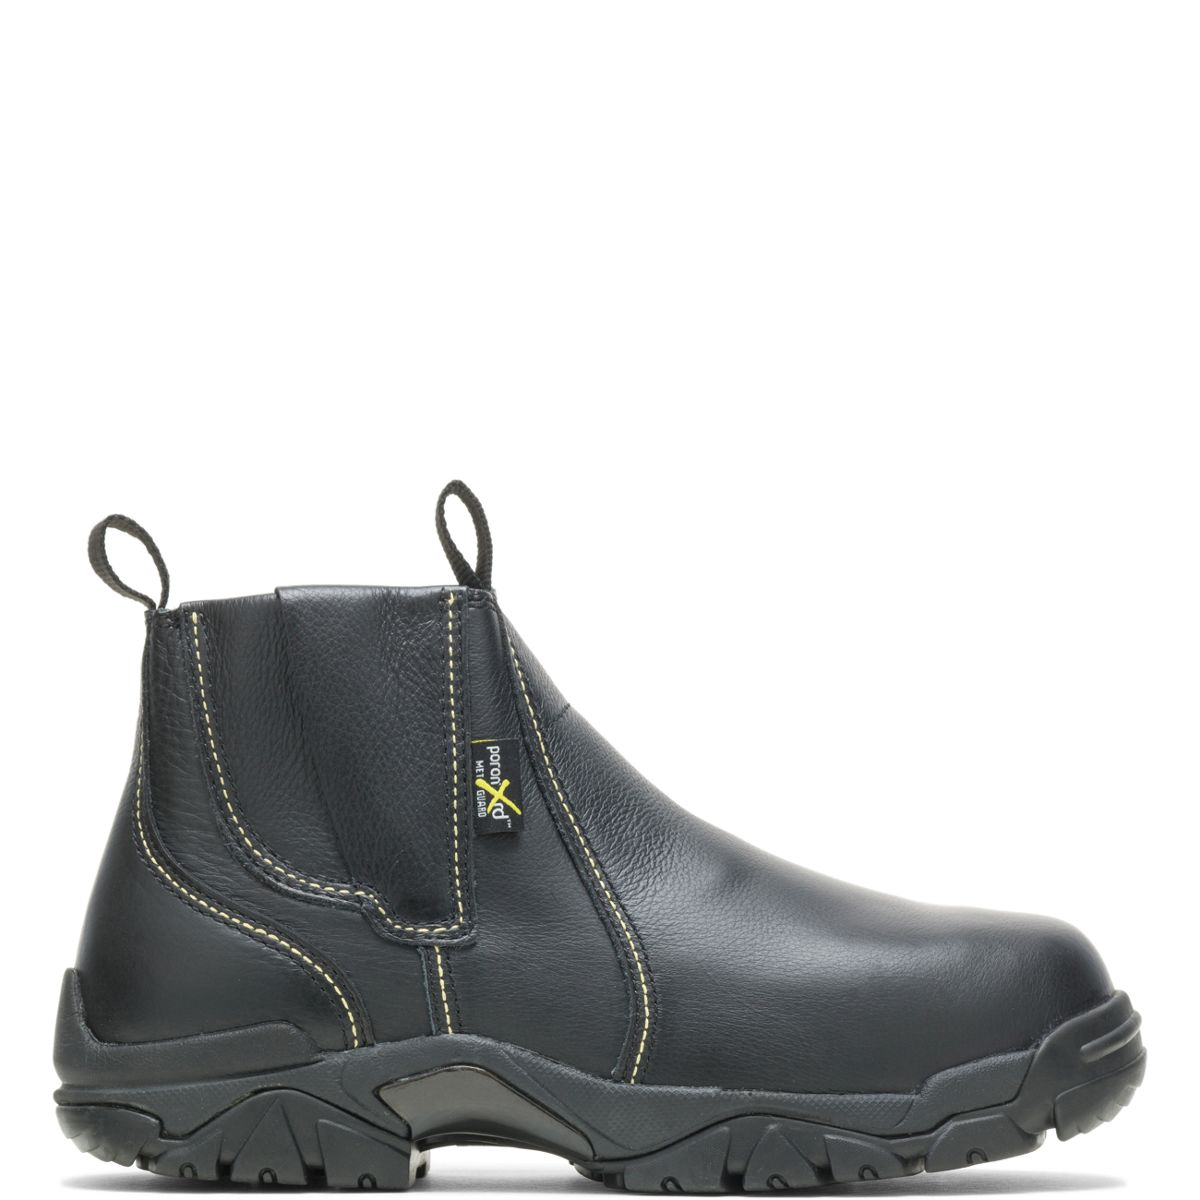 slip on safety boots